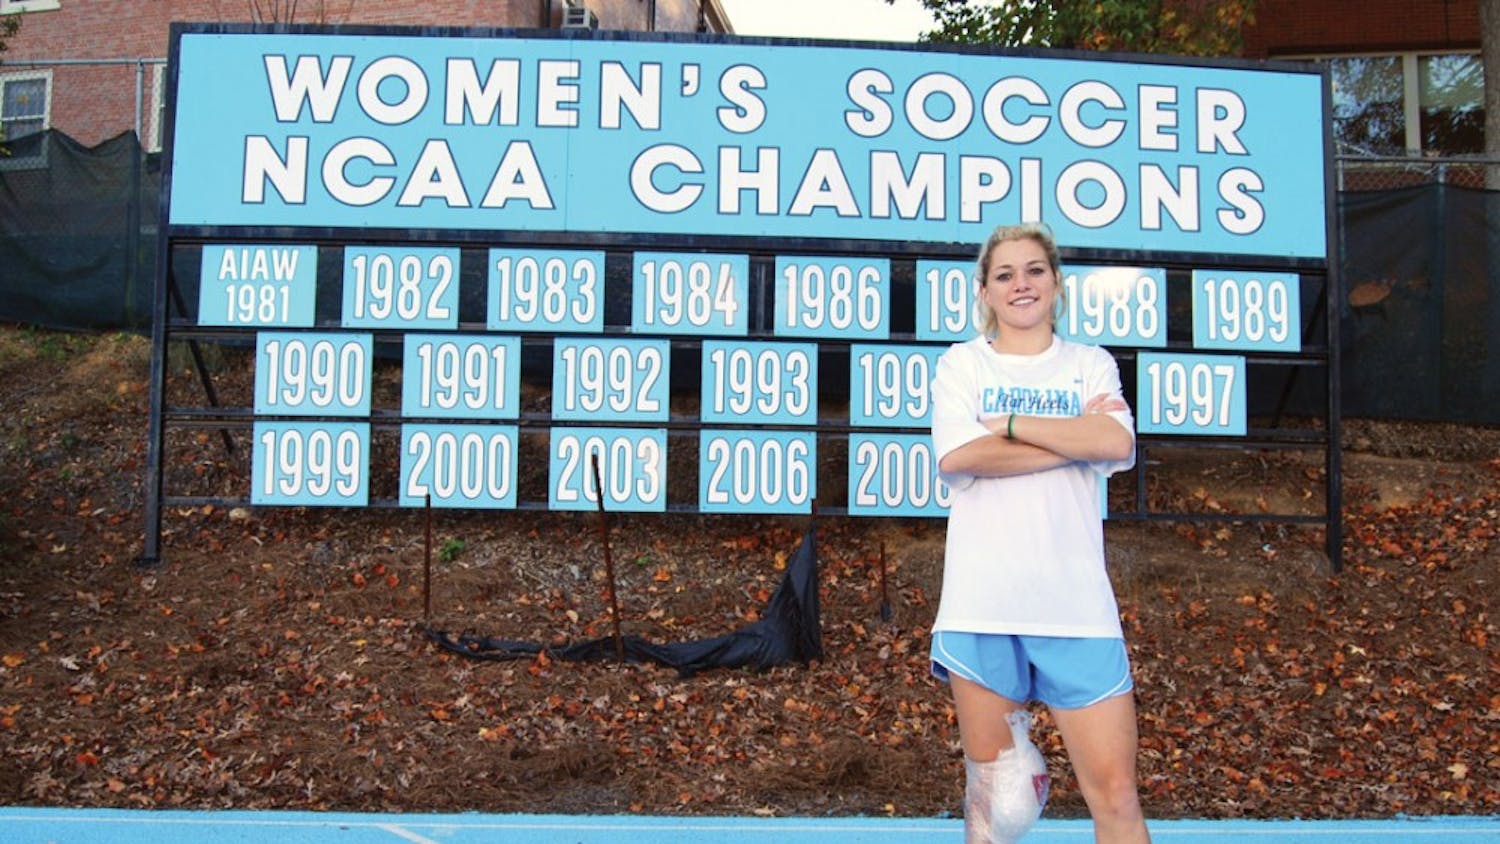 Freshman Kealia Ohai looks to add to the Tar Heels’ list of NCAA titles after leading the team with 13 goals this season.